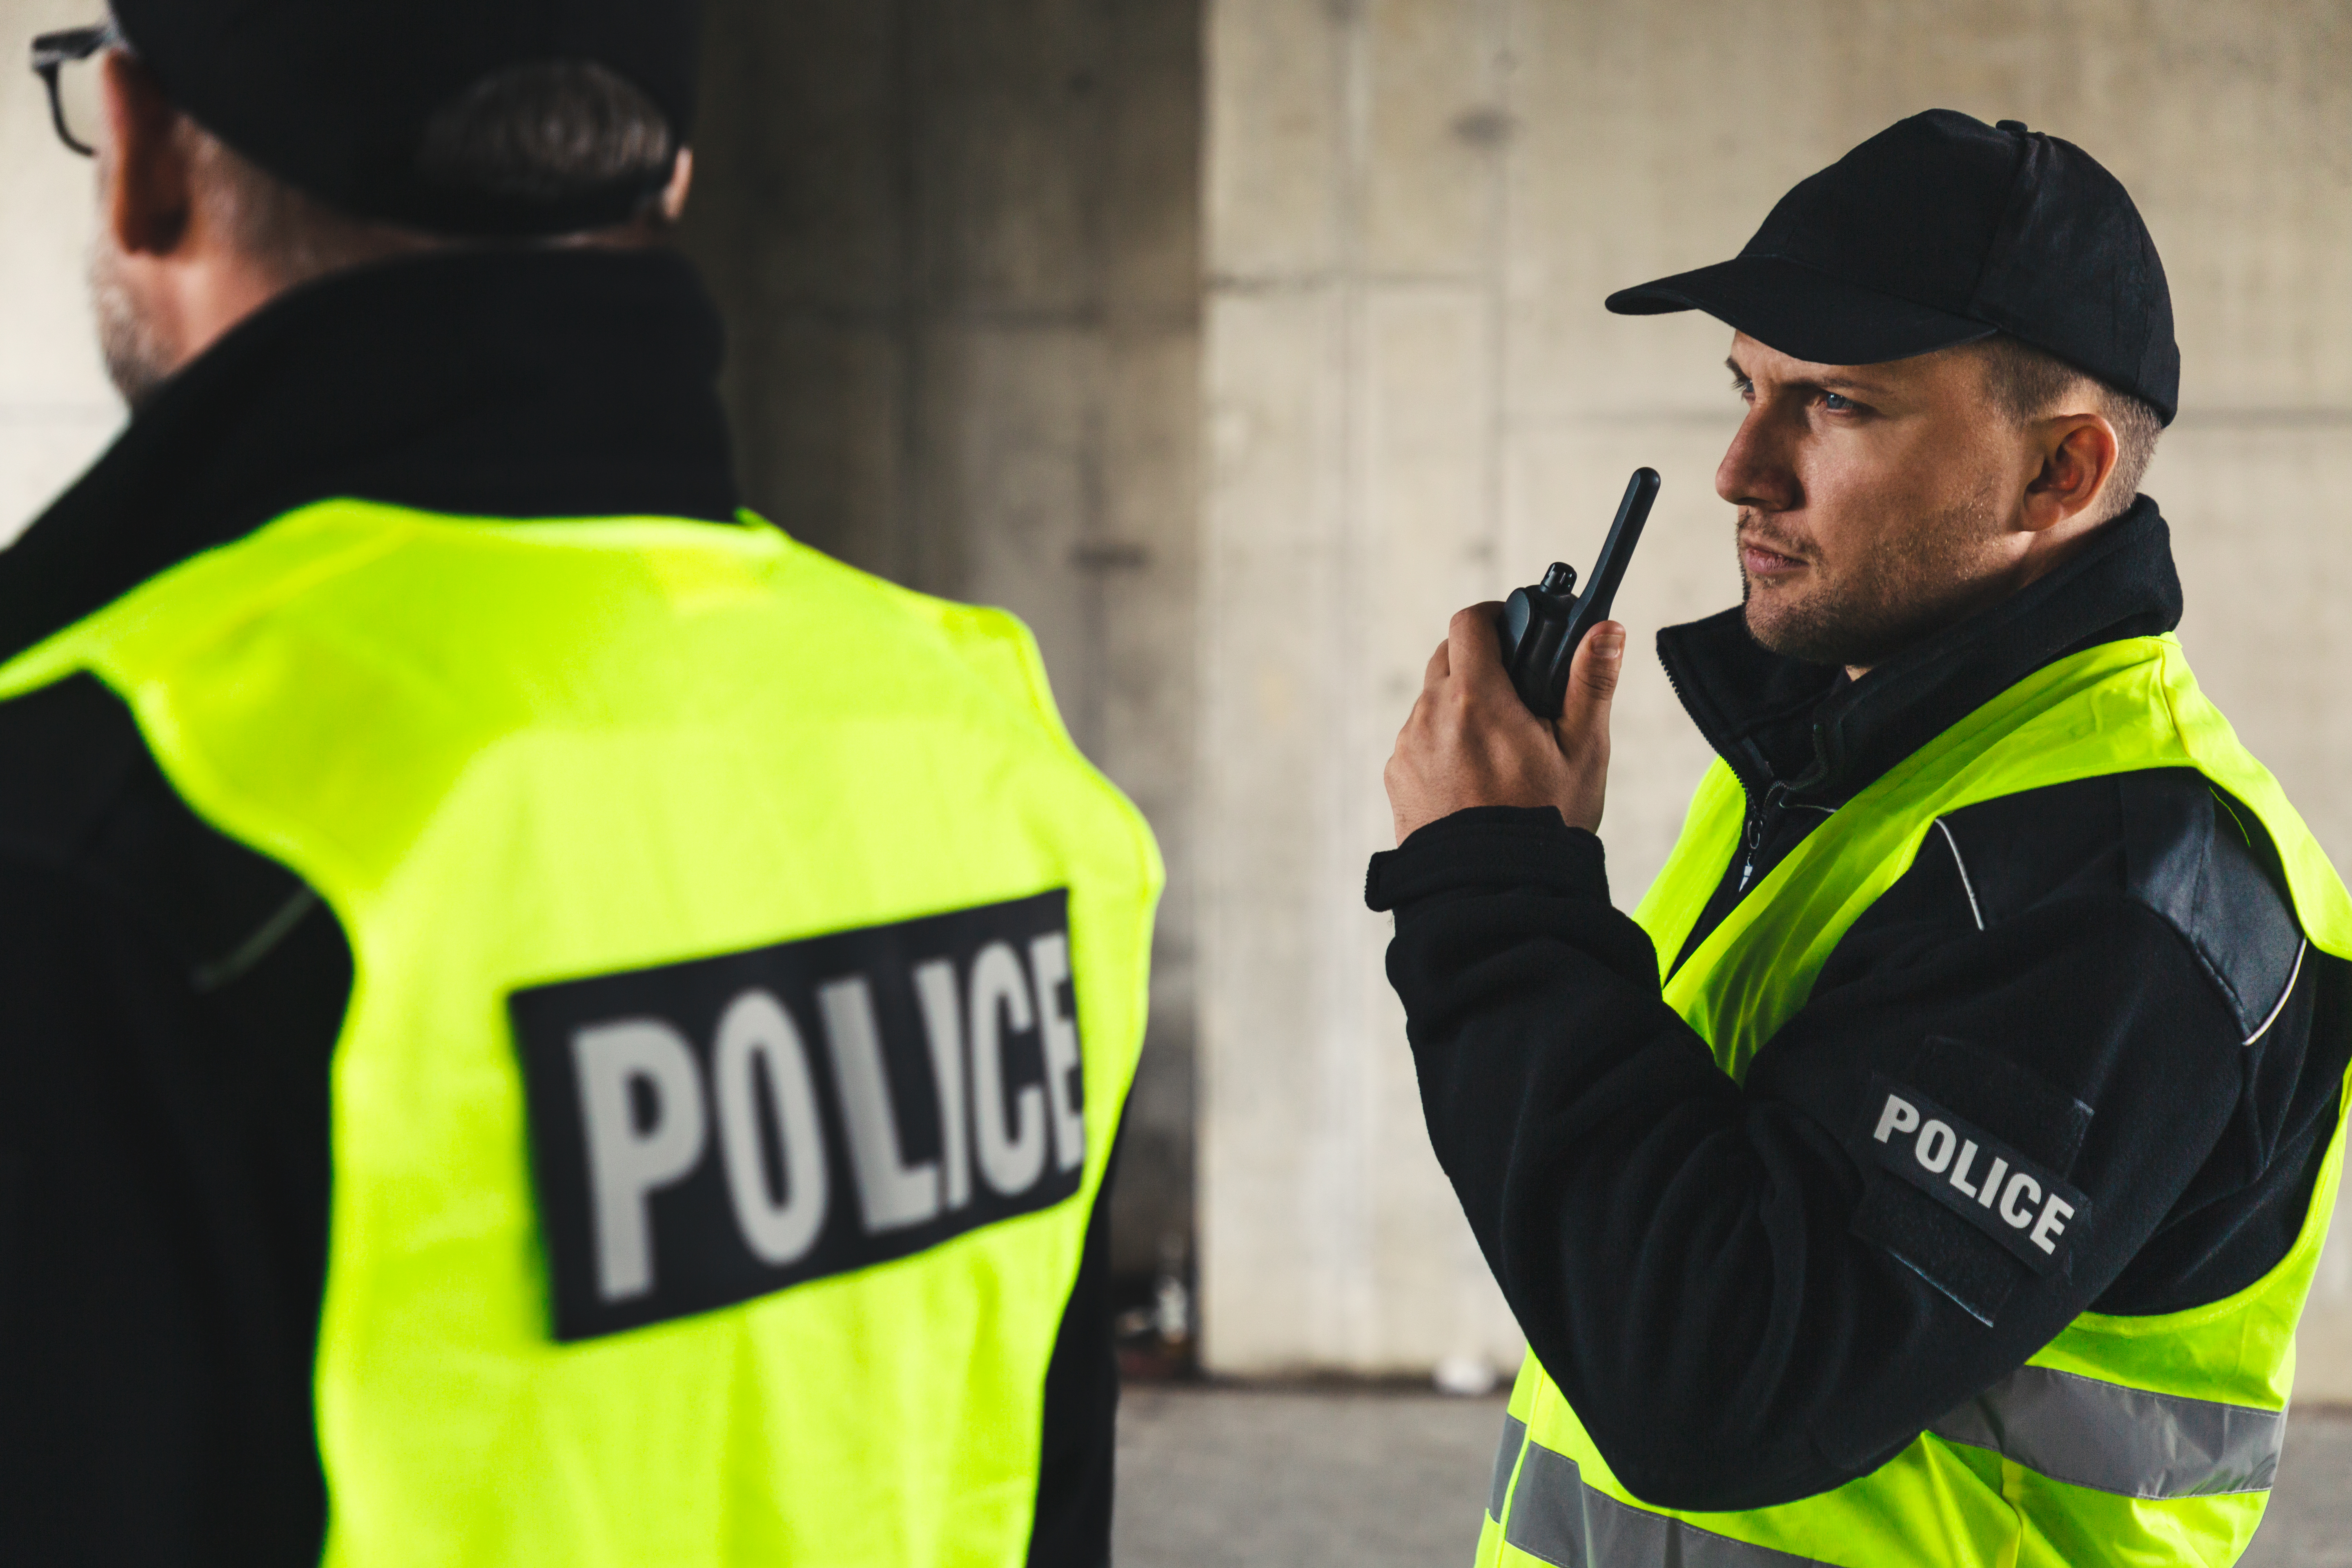 Proud policemen speaking on the walkie-talkie, reporting to station. | Source: Shutterstock